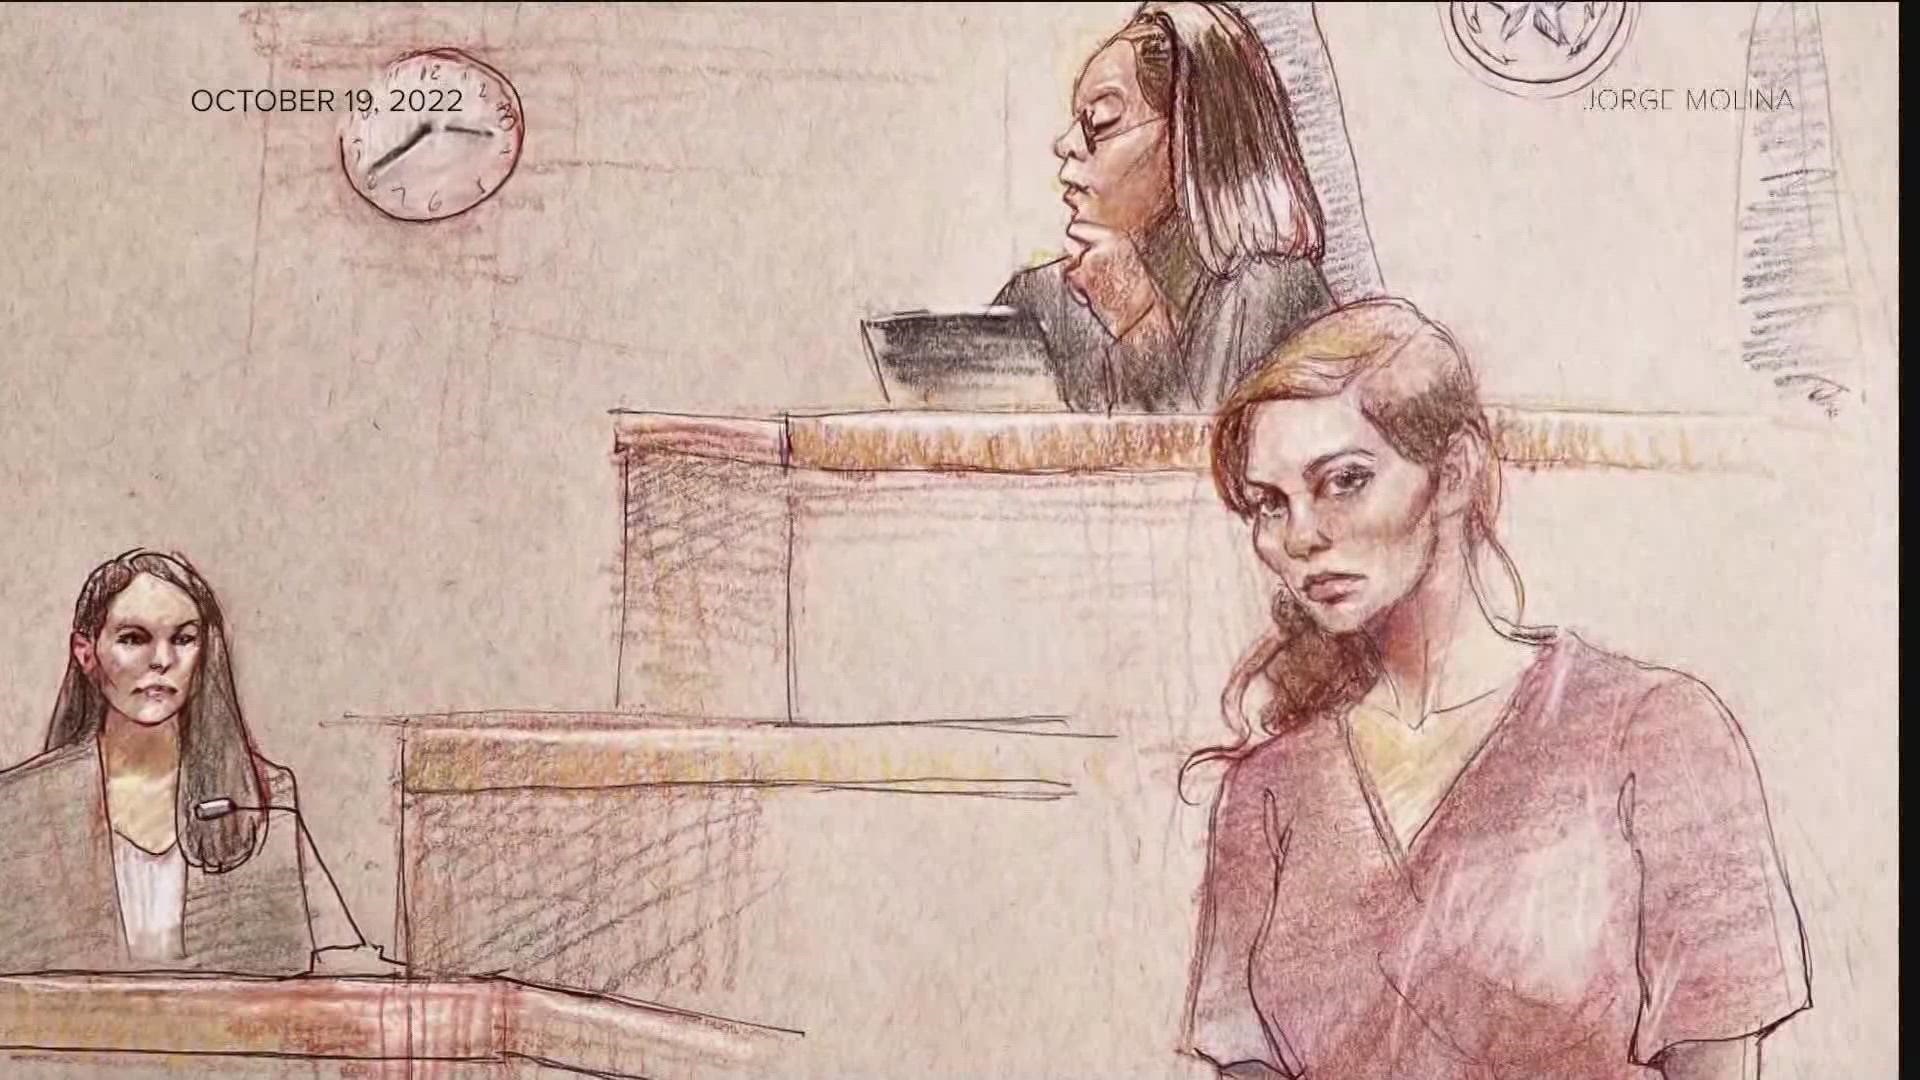 An Austin woman accused of killing a pro-cyclist and then hiding in Costa Rica is preparing for her trial. Her attorney is fighting to have some evidence thrown out.